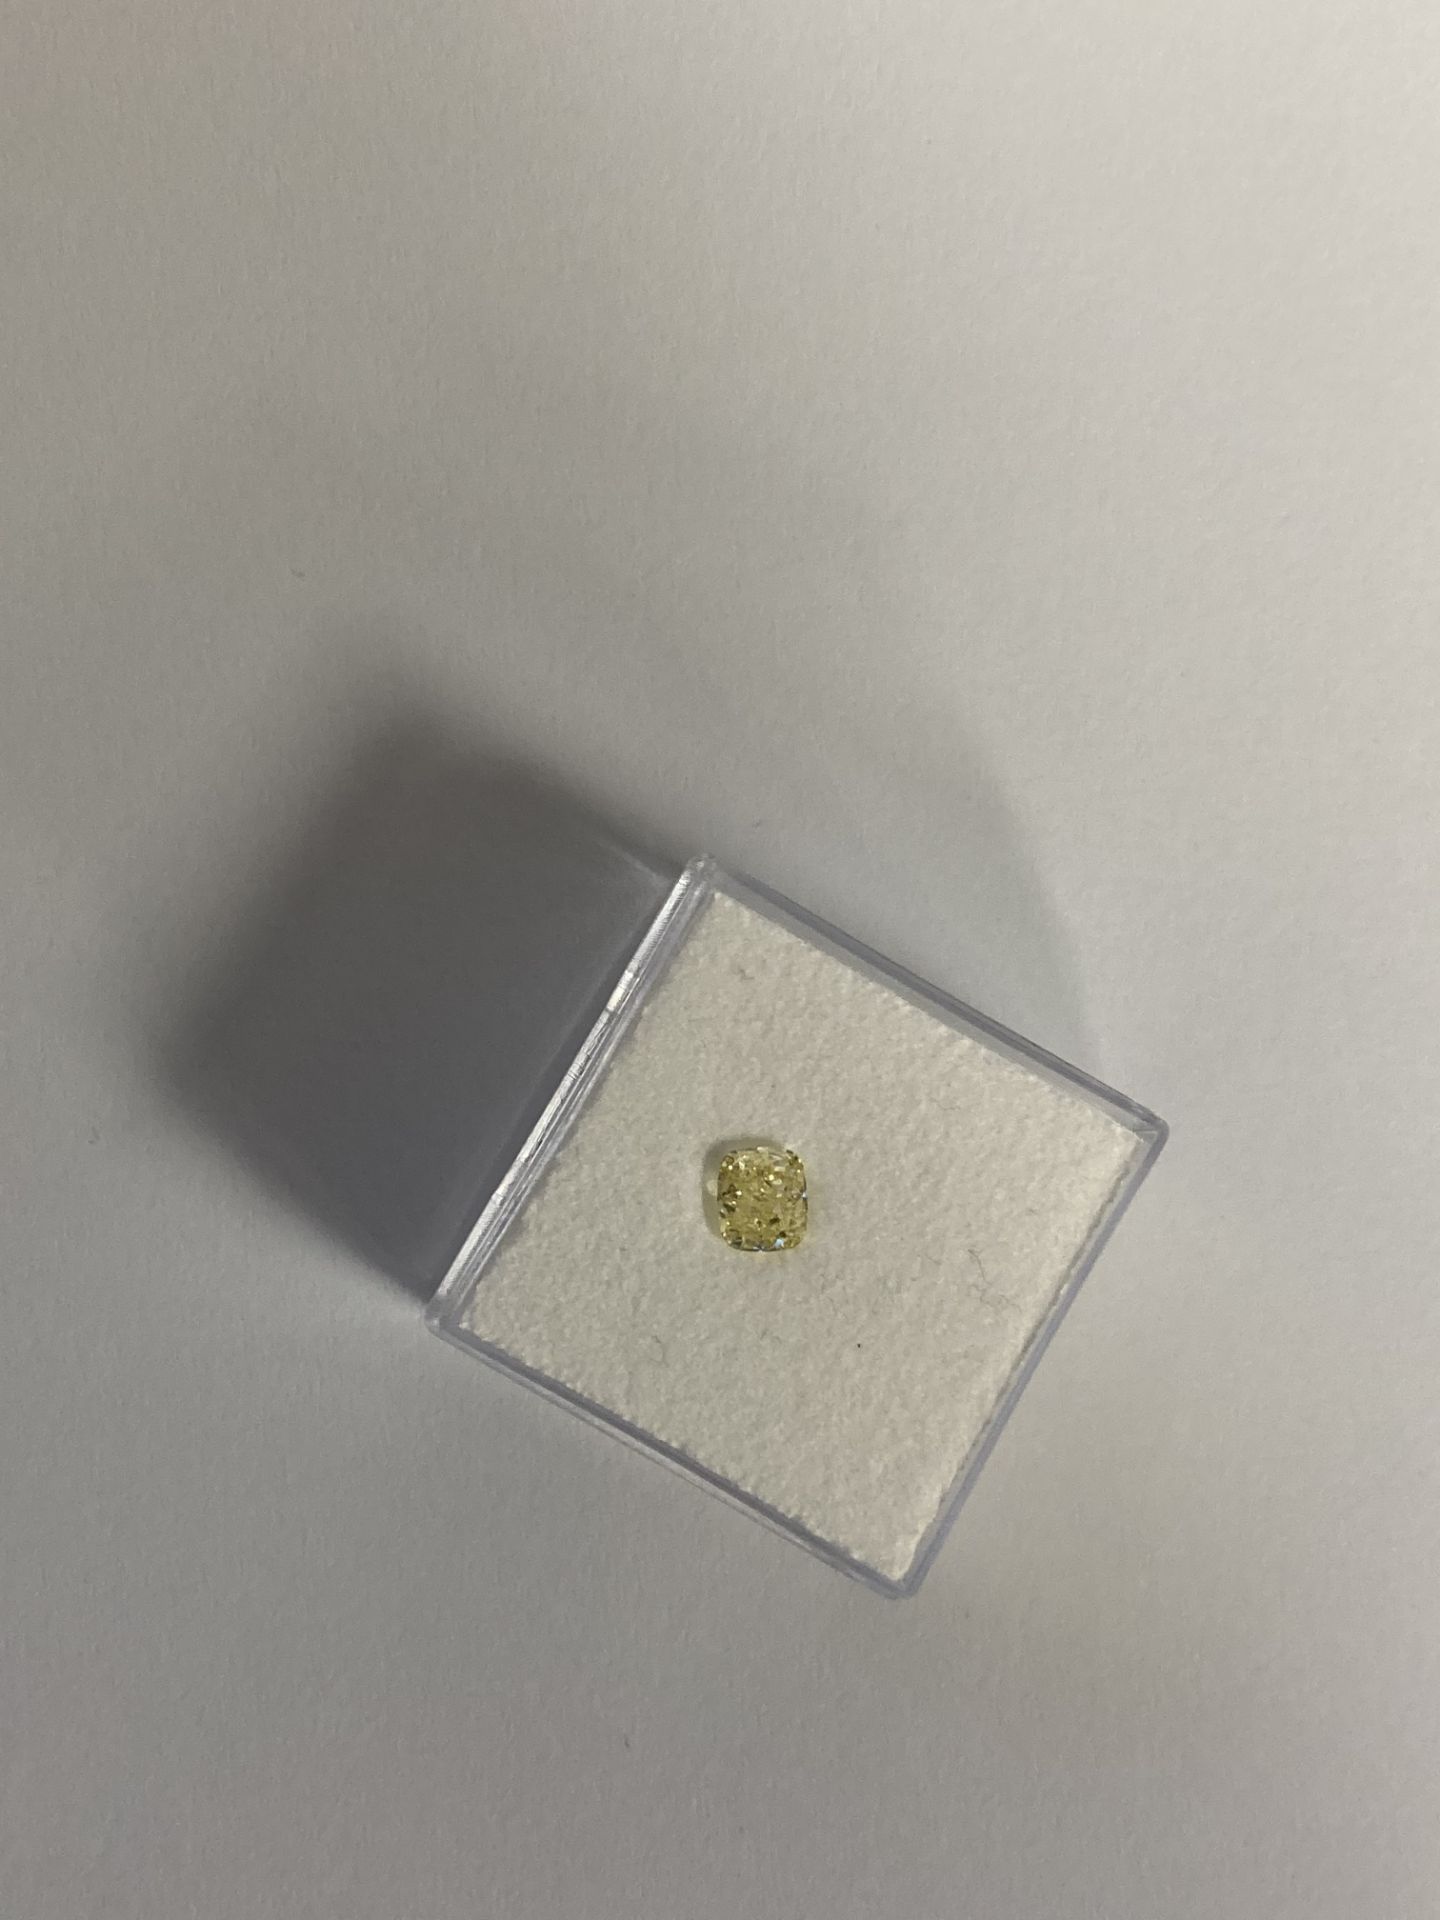 RRP £4,900 Cushion Modified Brilliant Cut 5.00X4.37X3.05Mm, 0.62 Carat Fancy Light Yellow Natural - Image 6 of 6